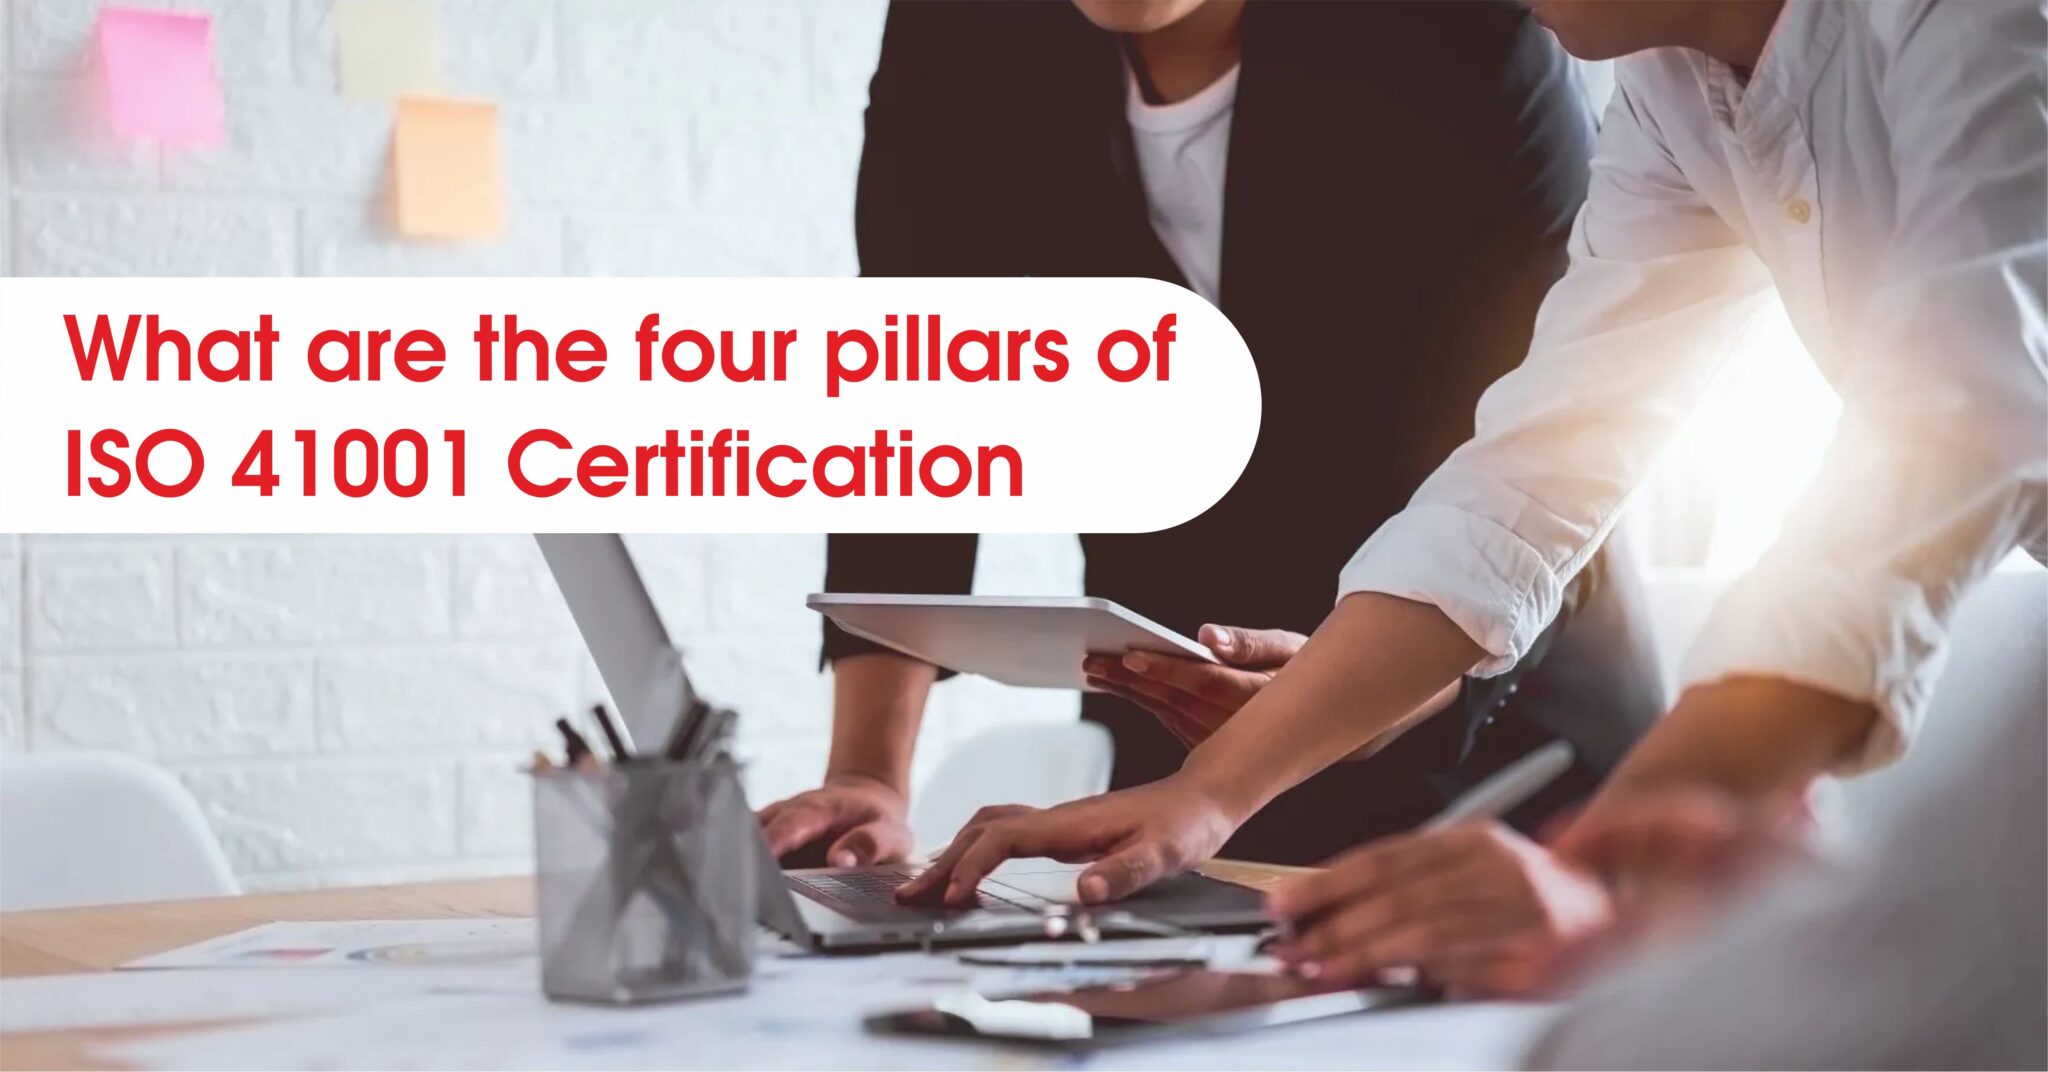 What are the four pillars of ISO 41001 Certification?